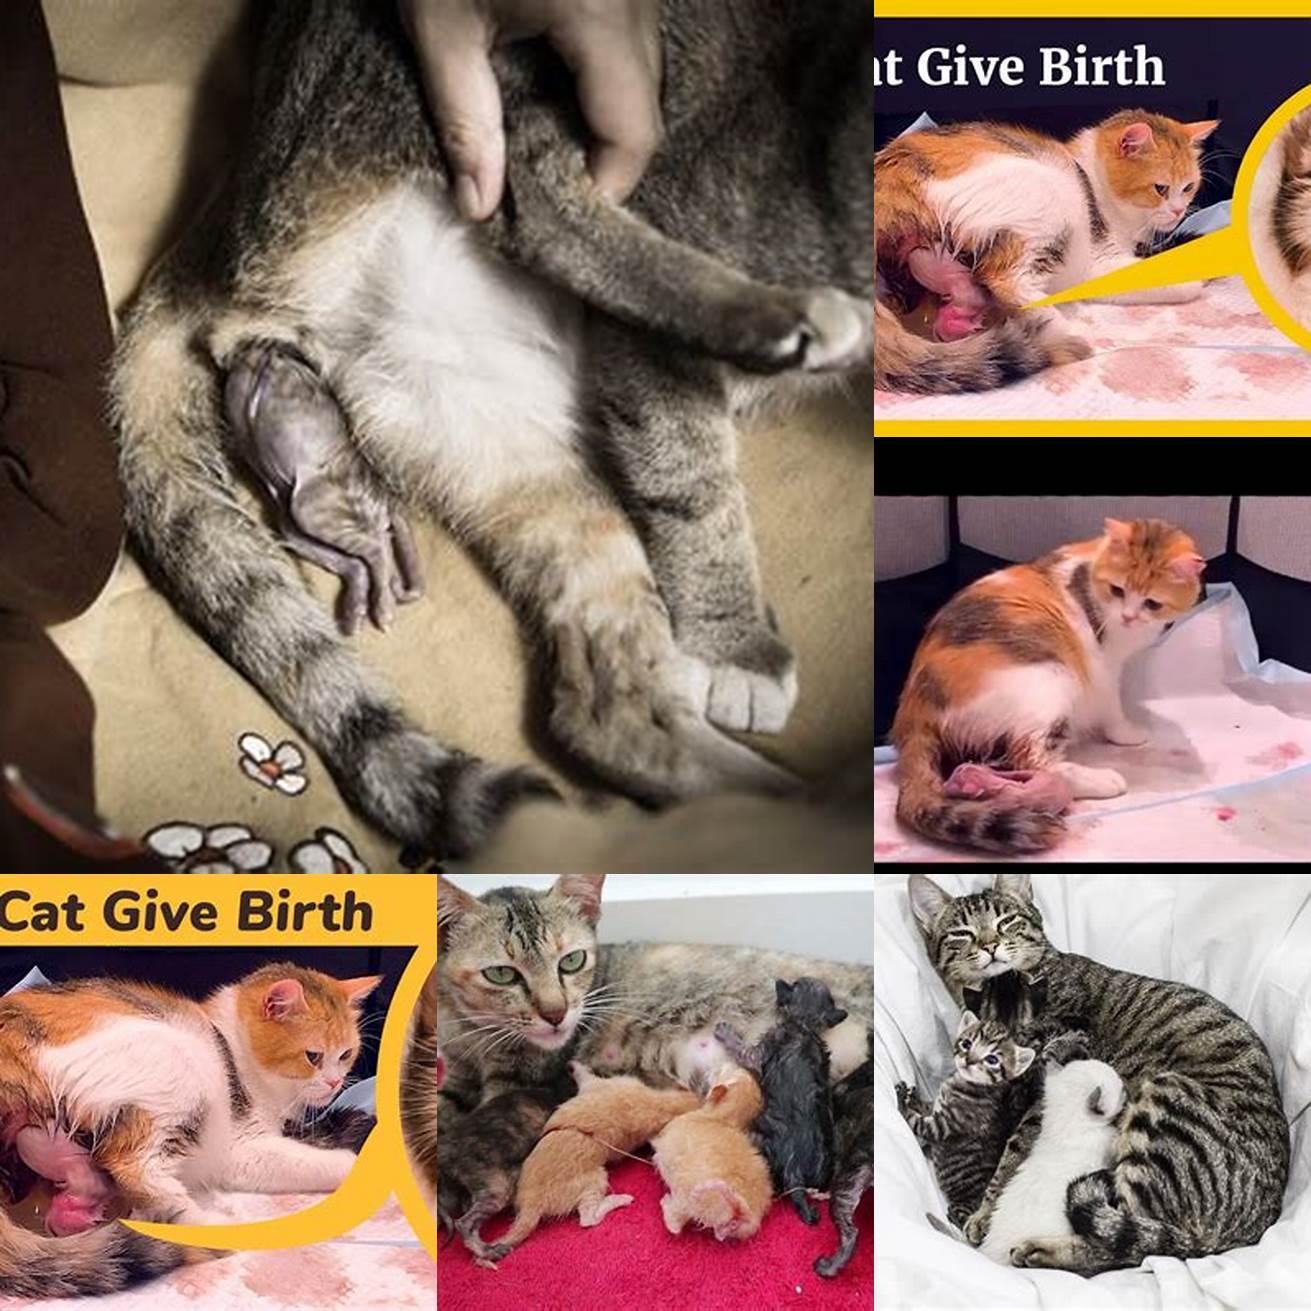 Myth Humans can give birth to cat babies